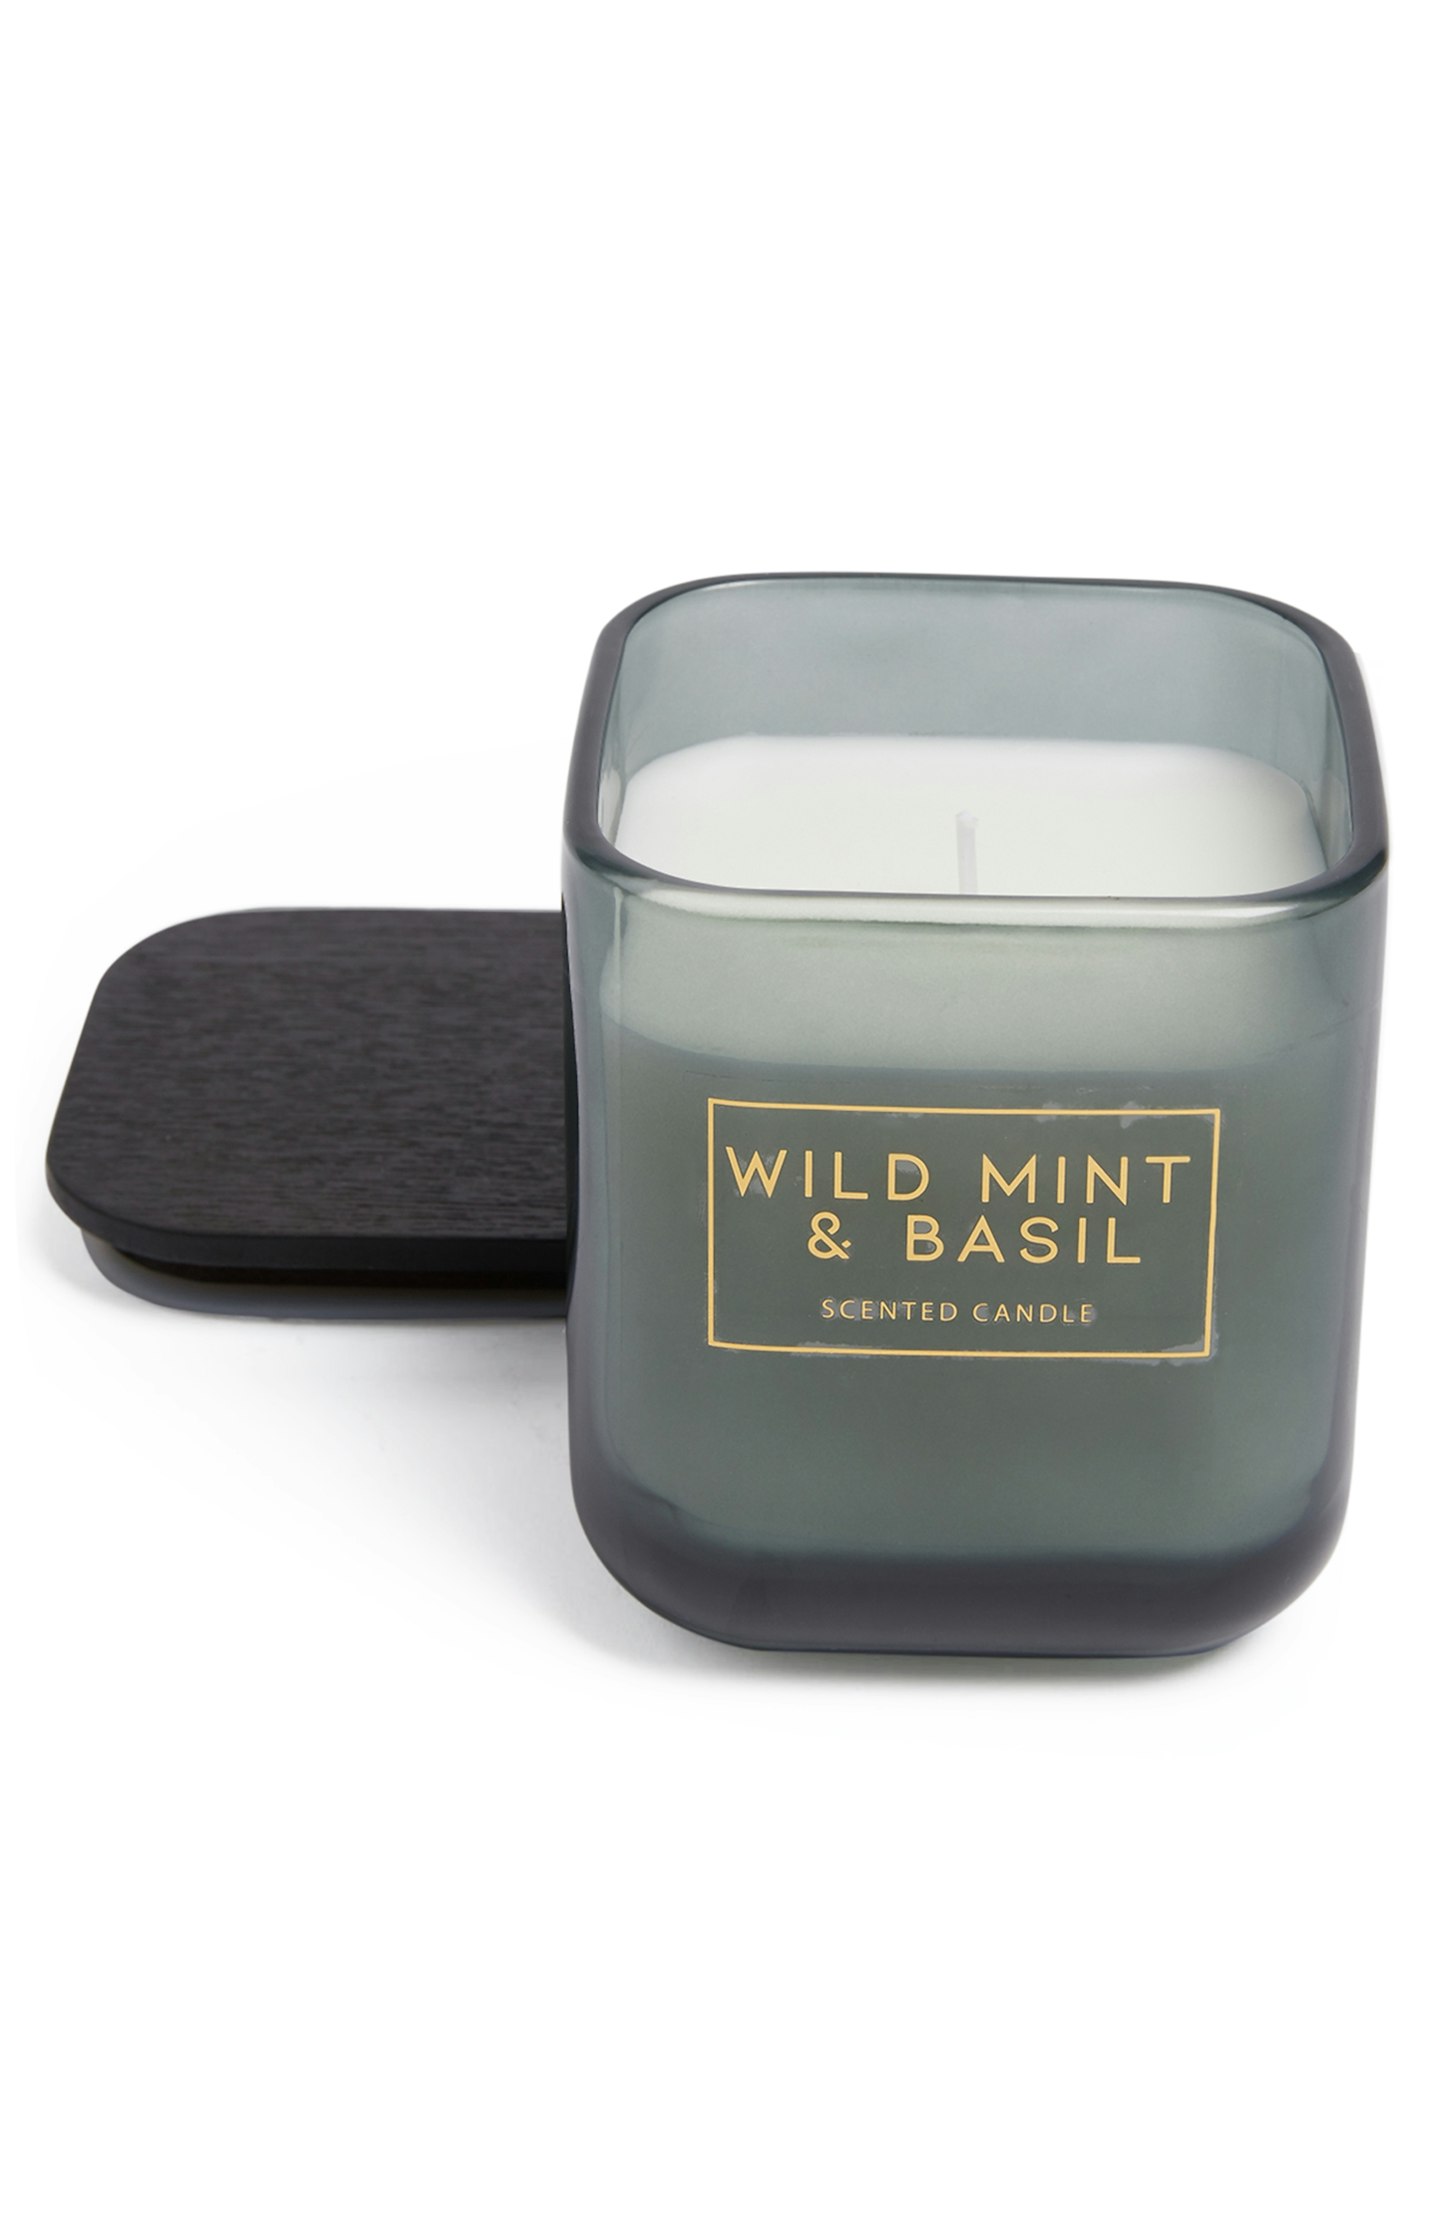 Primark, Wild Mint And Basil Candle, £4